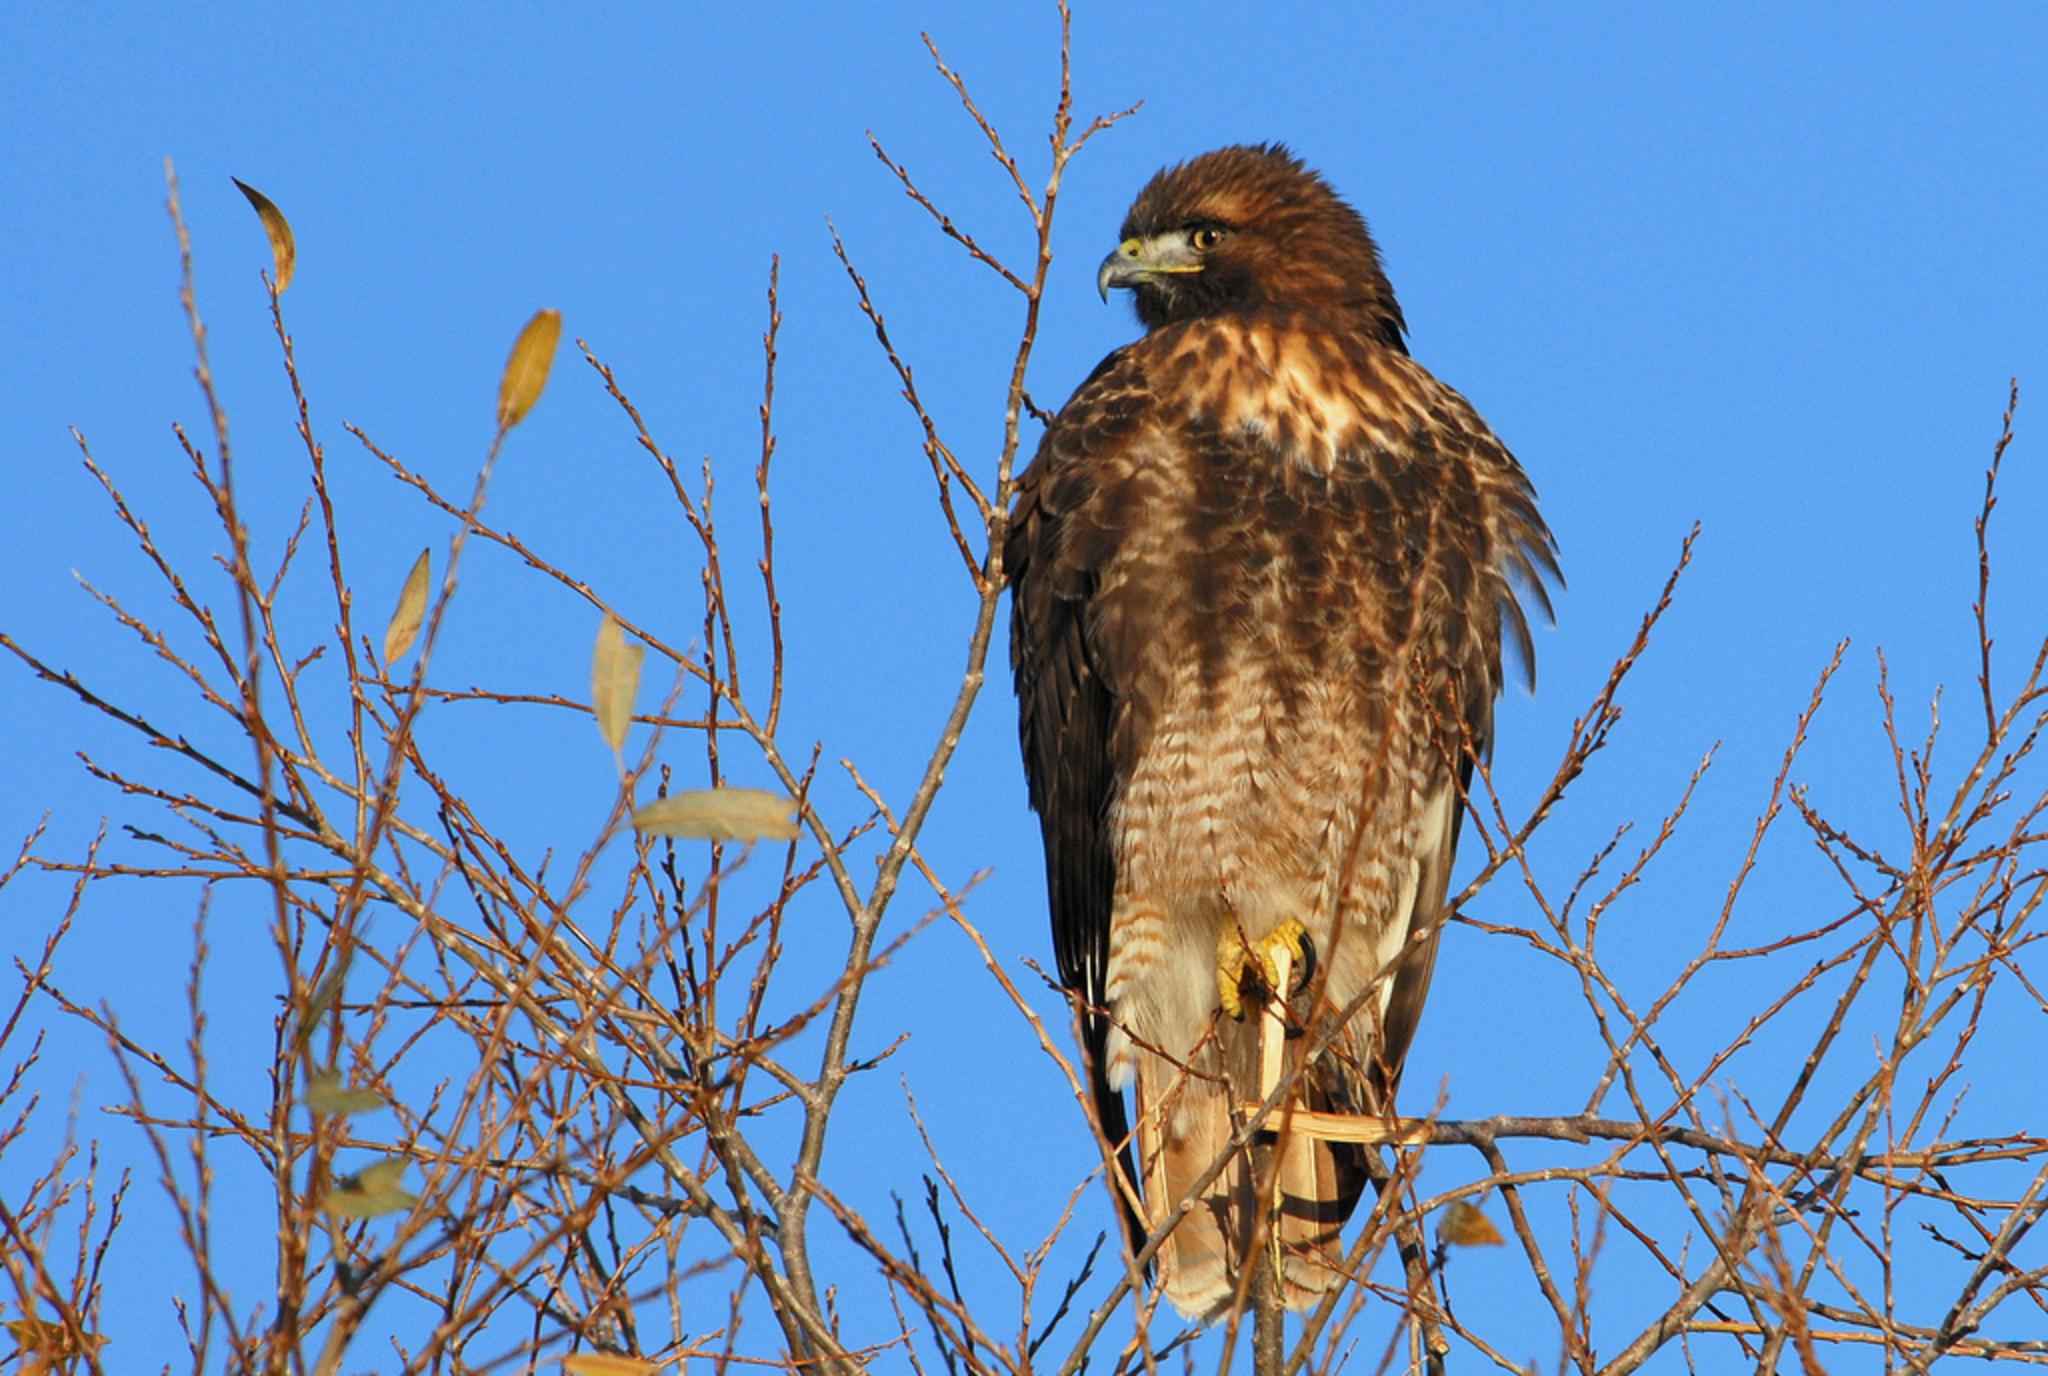 Red tailed hawk free images, public domain images